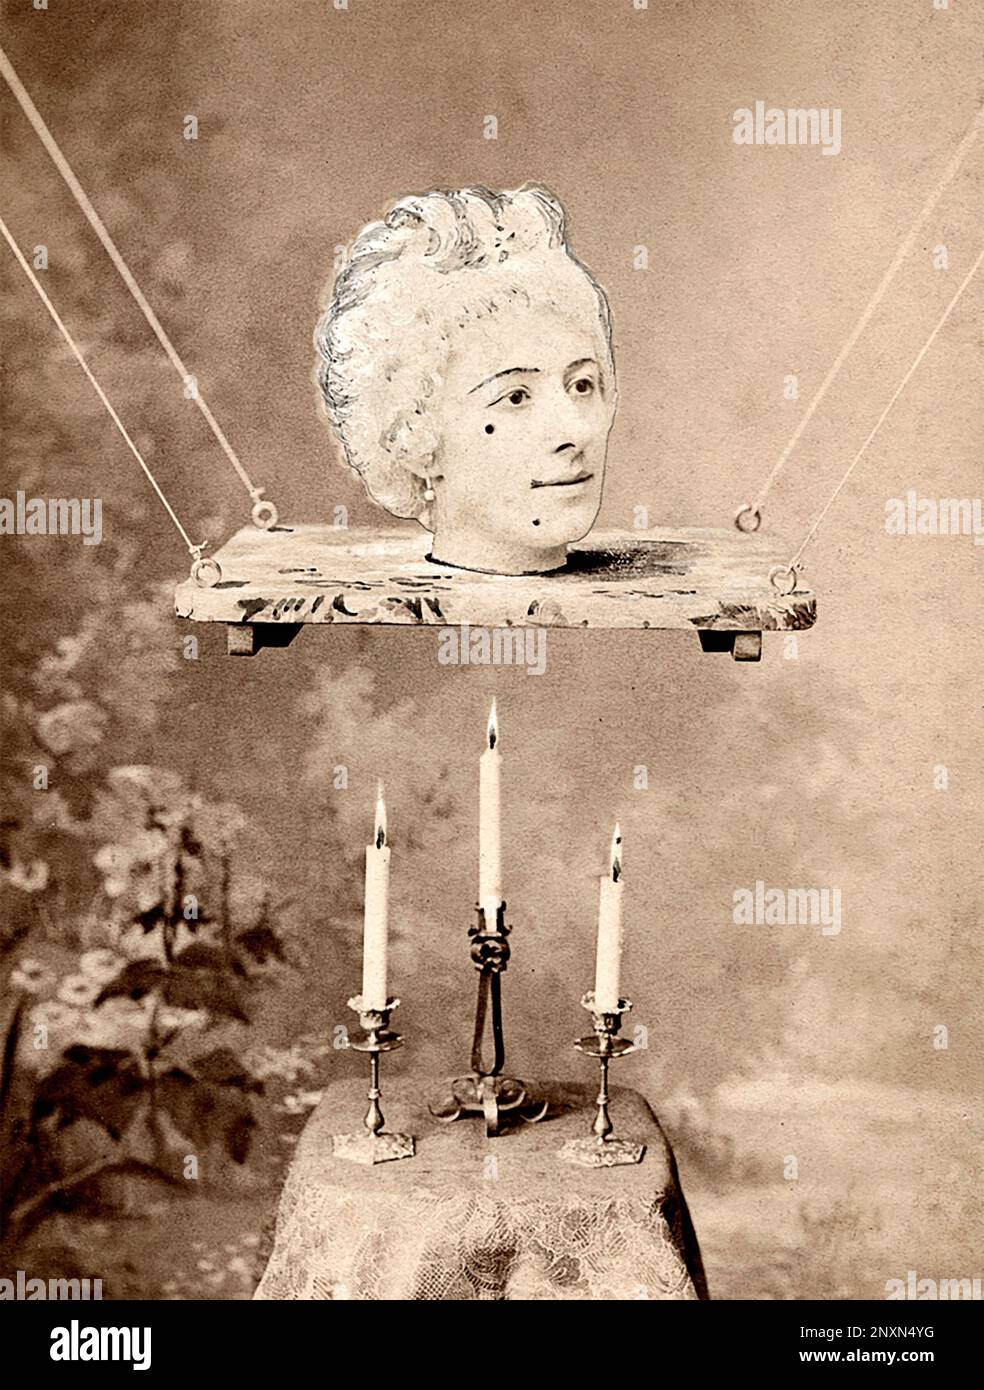 Photographic collage showing Jehanne d'Alcy as she appeared (as a magically suspended head) in Georges Melies's stage illusion La Source enchantee (1892) at the Theatre Robert-Houdin in Paris, 1892. Stock Photo